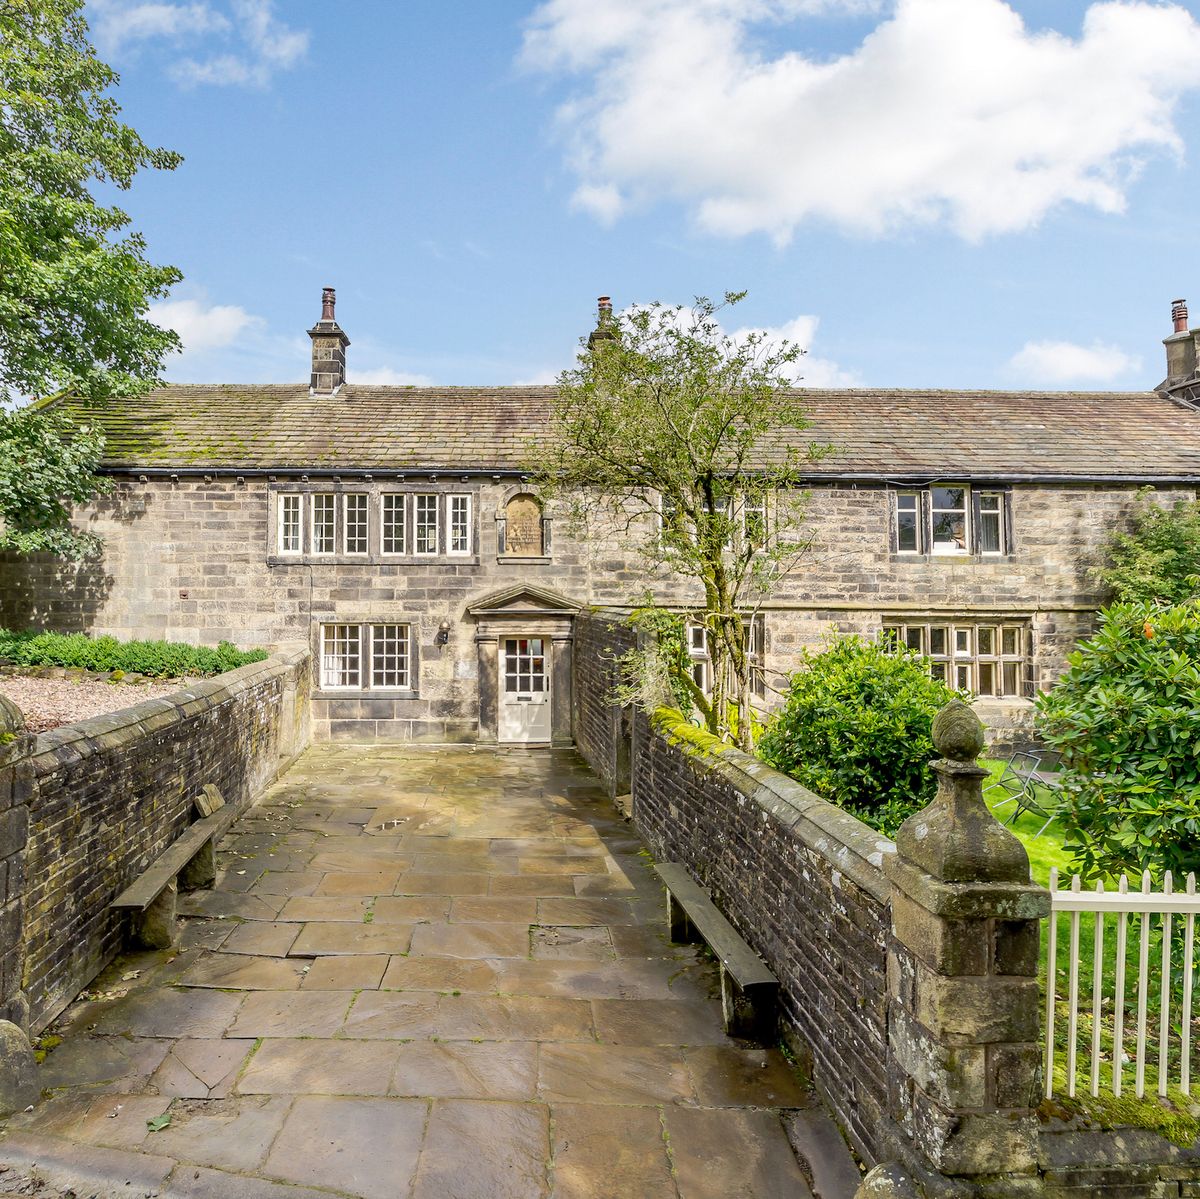 ponden hall which inspired emily bronte's wuthering heights is up for sale in west yorkshire